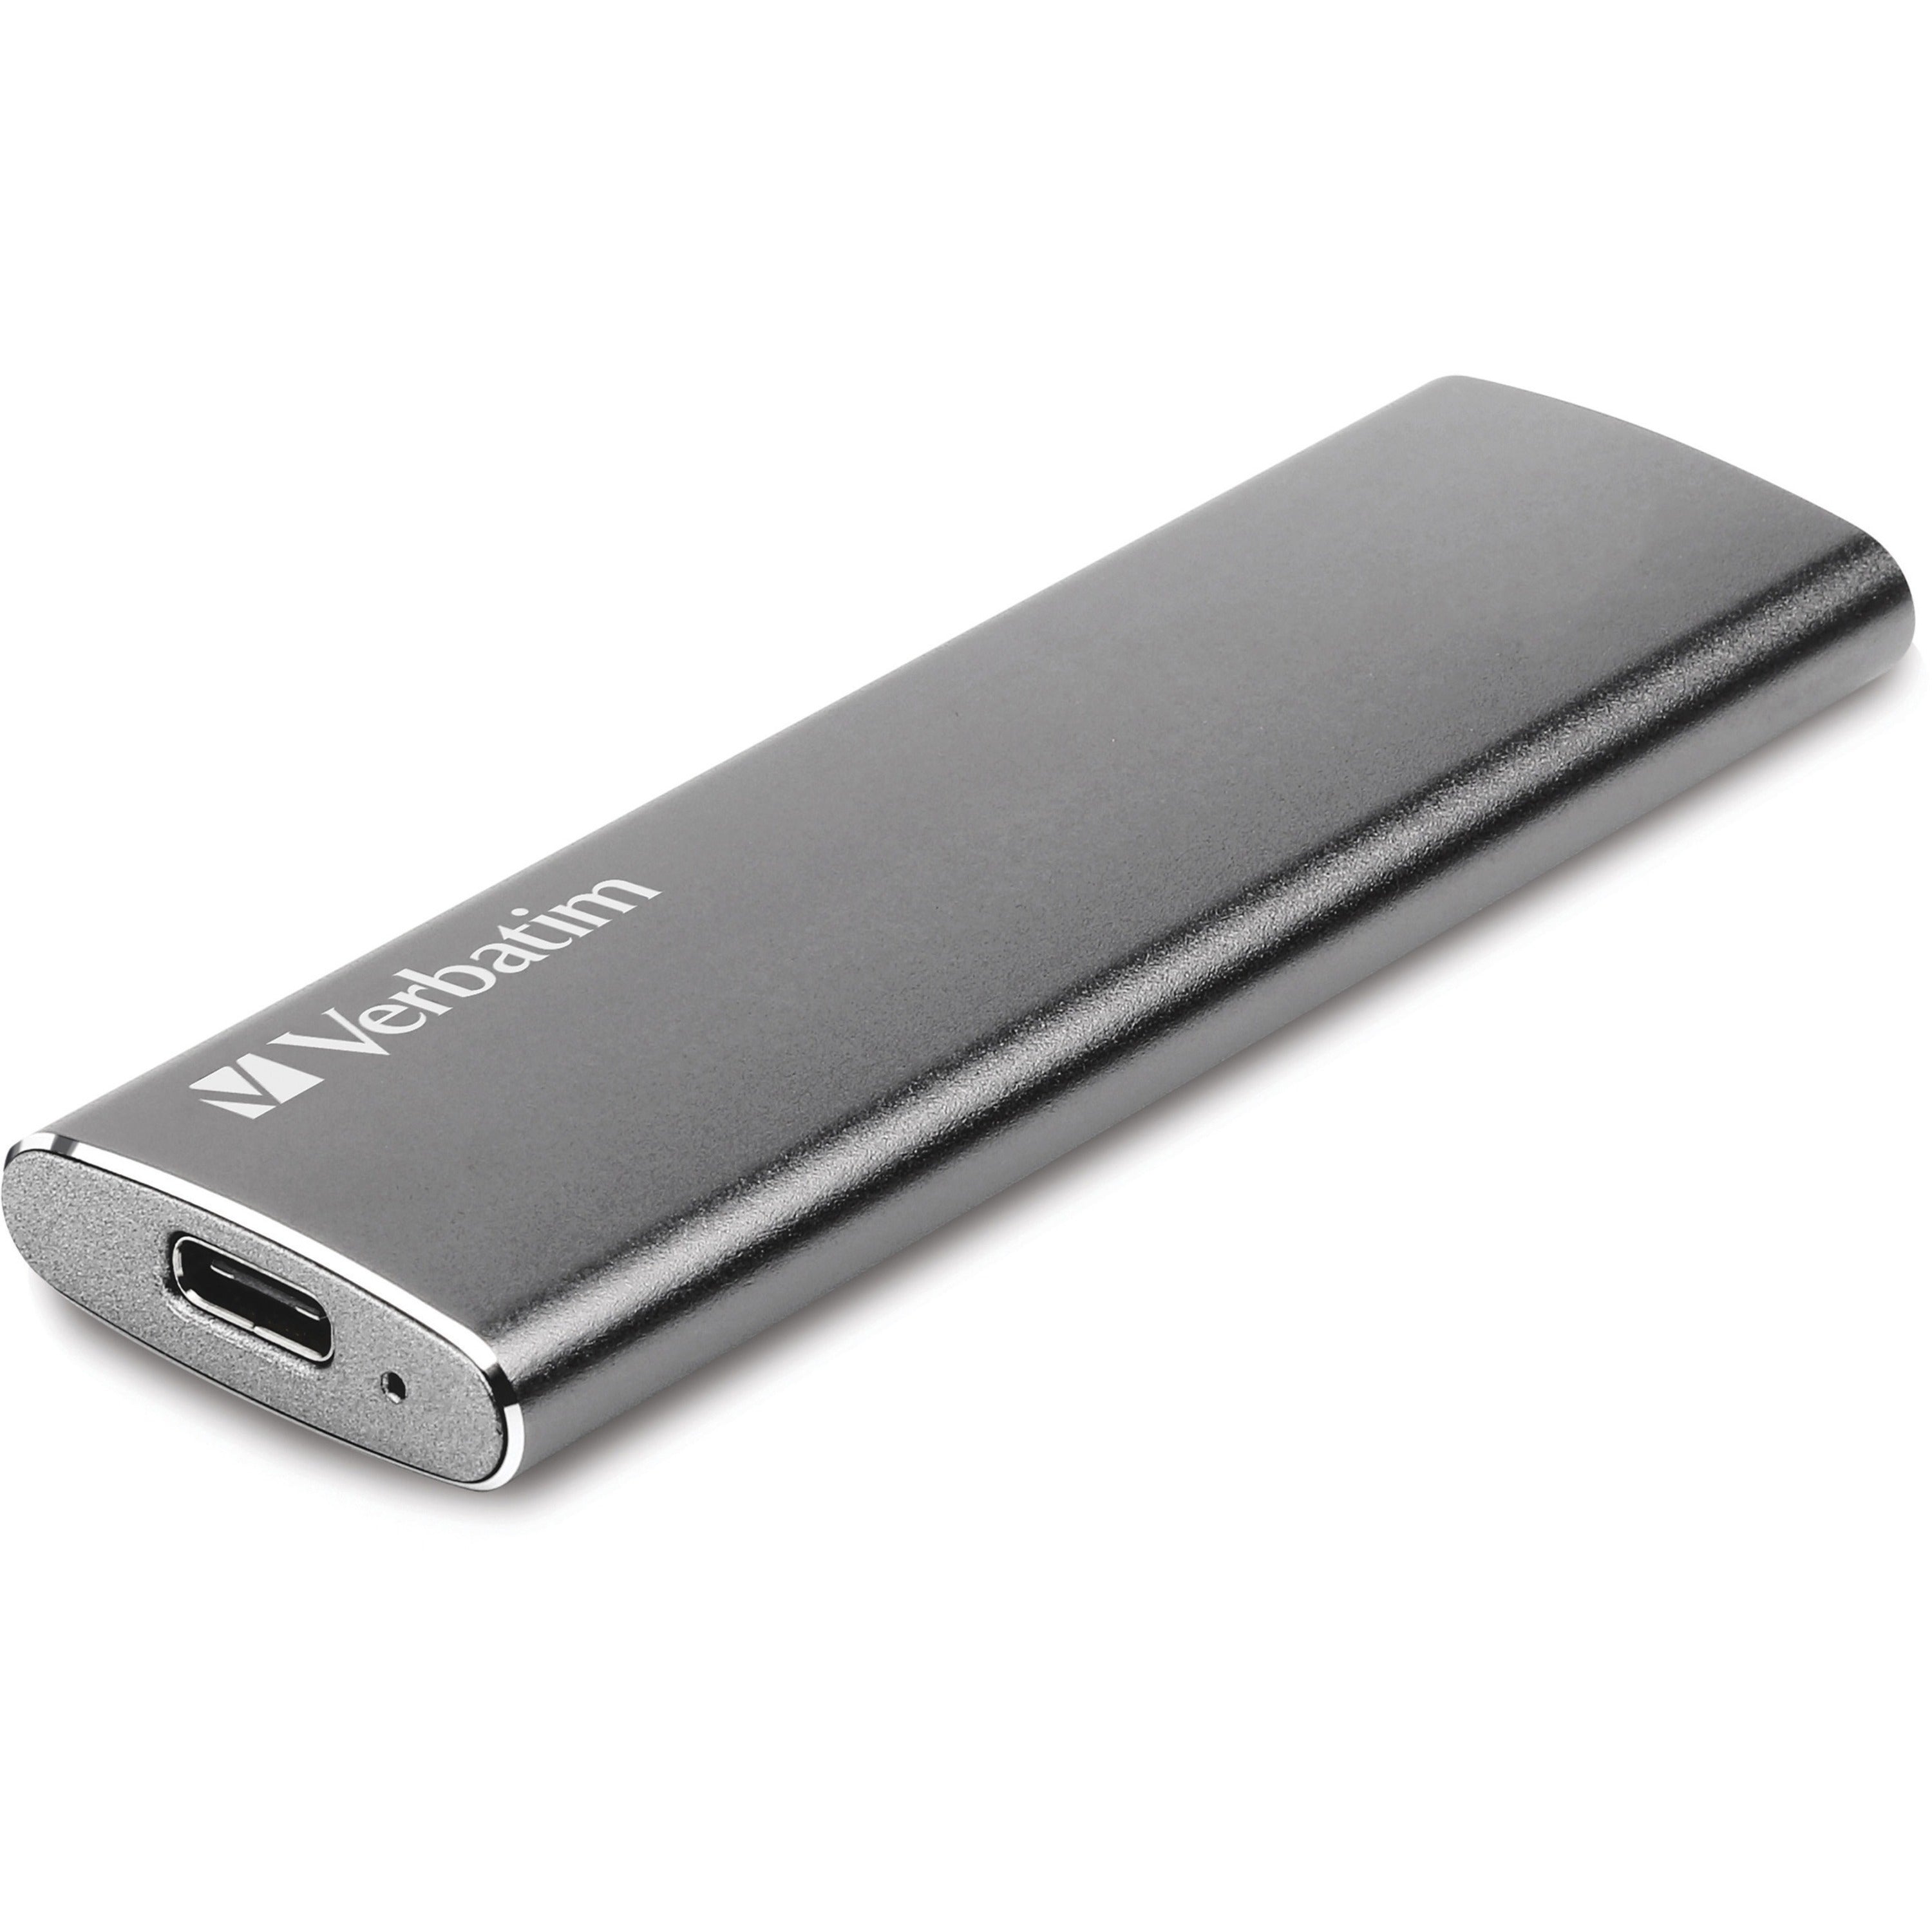 verbatim-120gb-vx500-external-ssd-usb-31-gen-2-graphite-notebook-device-supported-usb-31-type-c-500-mb-s-maximum-read-transfer-rate-2-year-warranty_ver47441 - 1